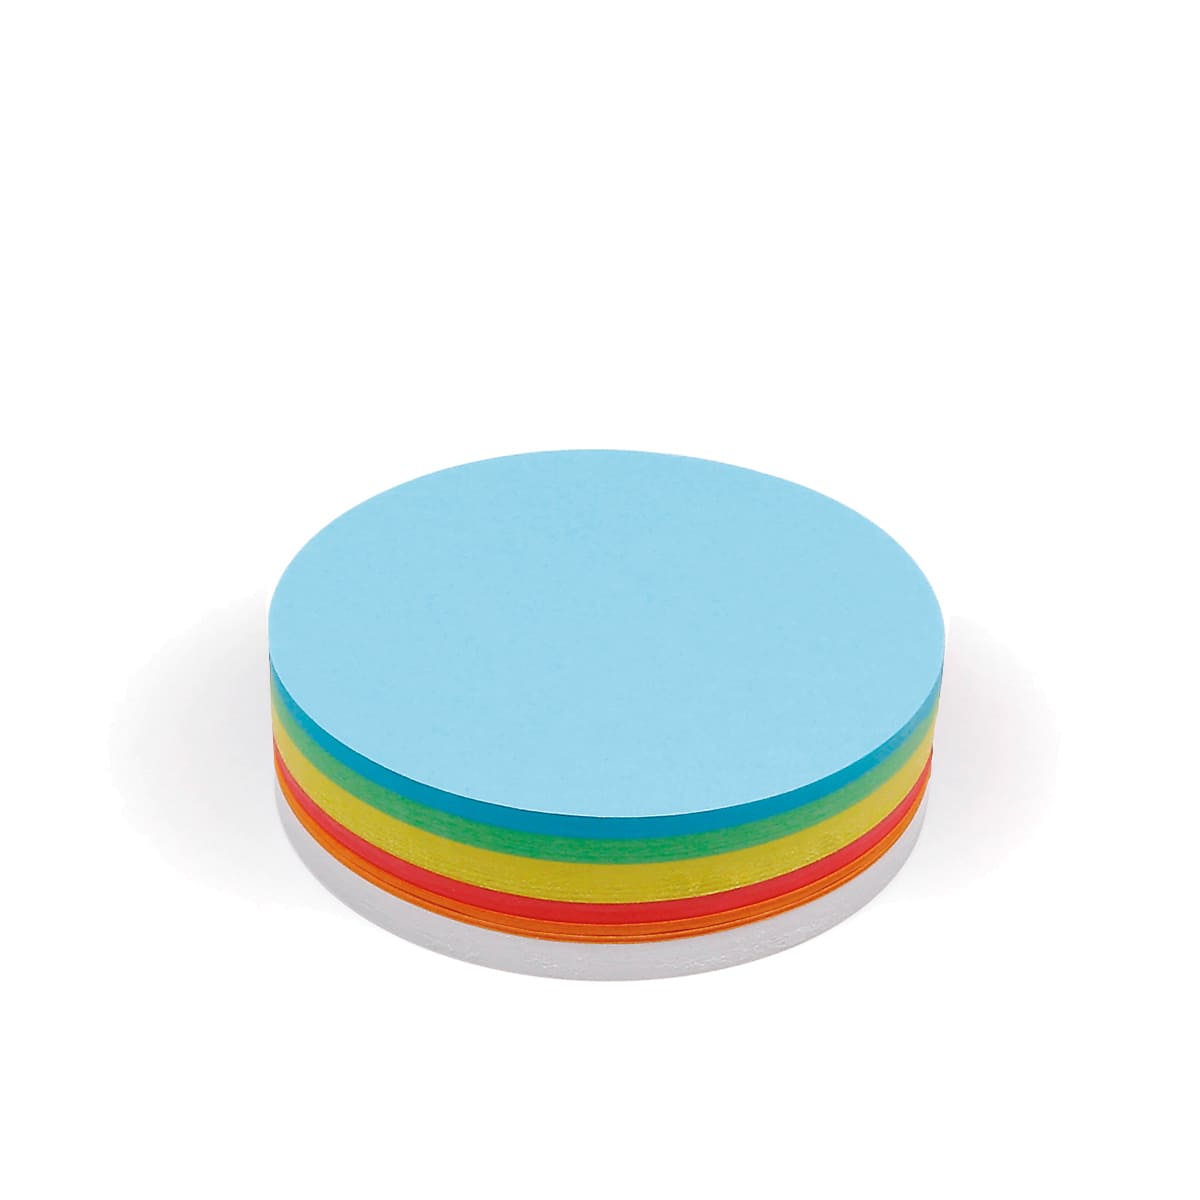 Pin-It Cards, medium round, 250 sheets, assorted